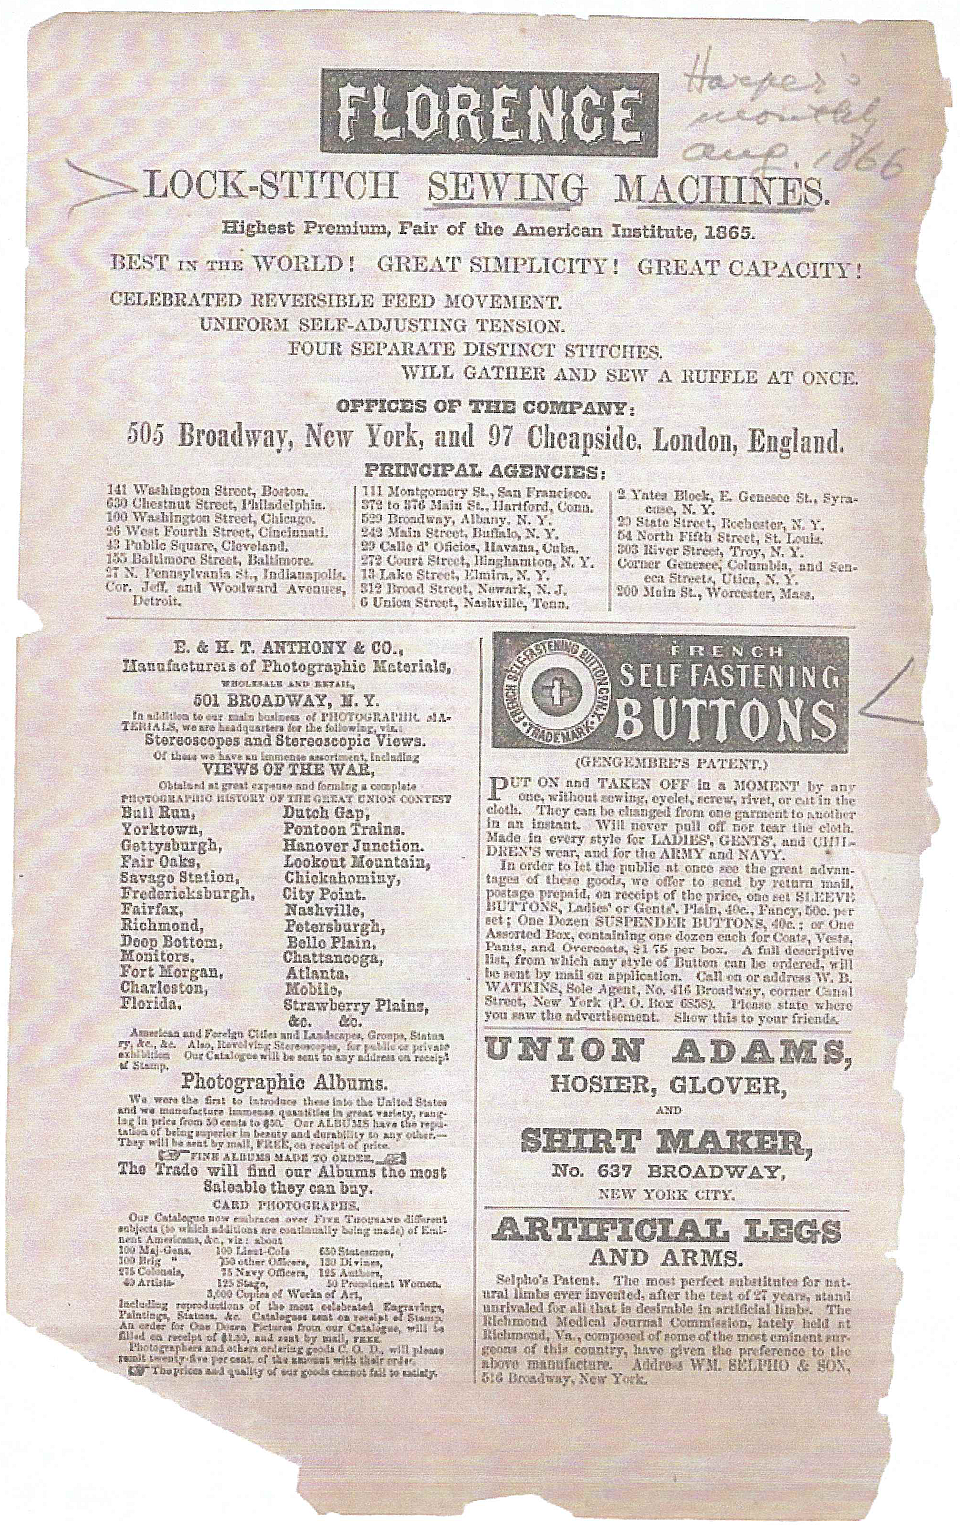 Harper's 1866 Advertisement for the Florence Sewing Machine